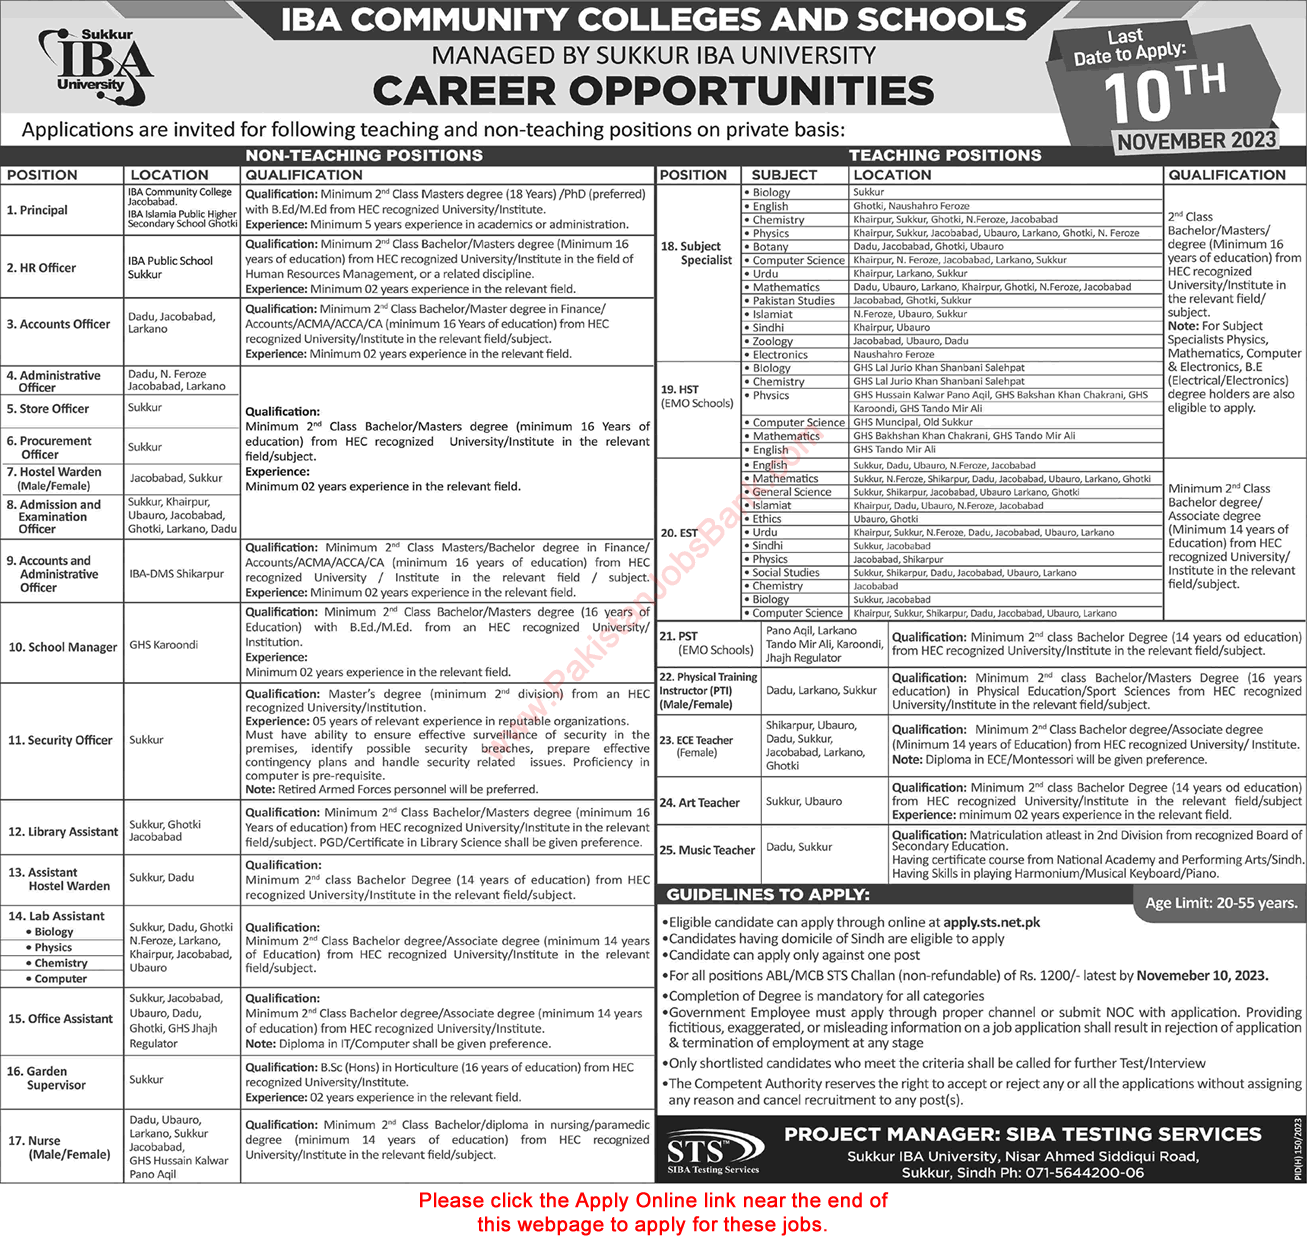 IBA Community Colleges and Schools Sindh Jobs 2023 October STS Apply Online Teachers & Others Latest